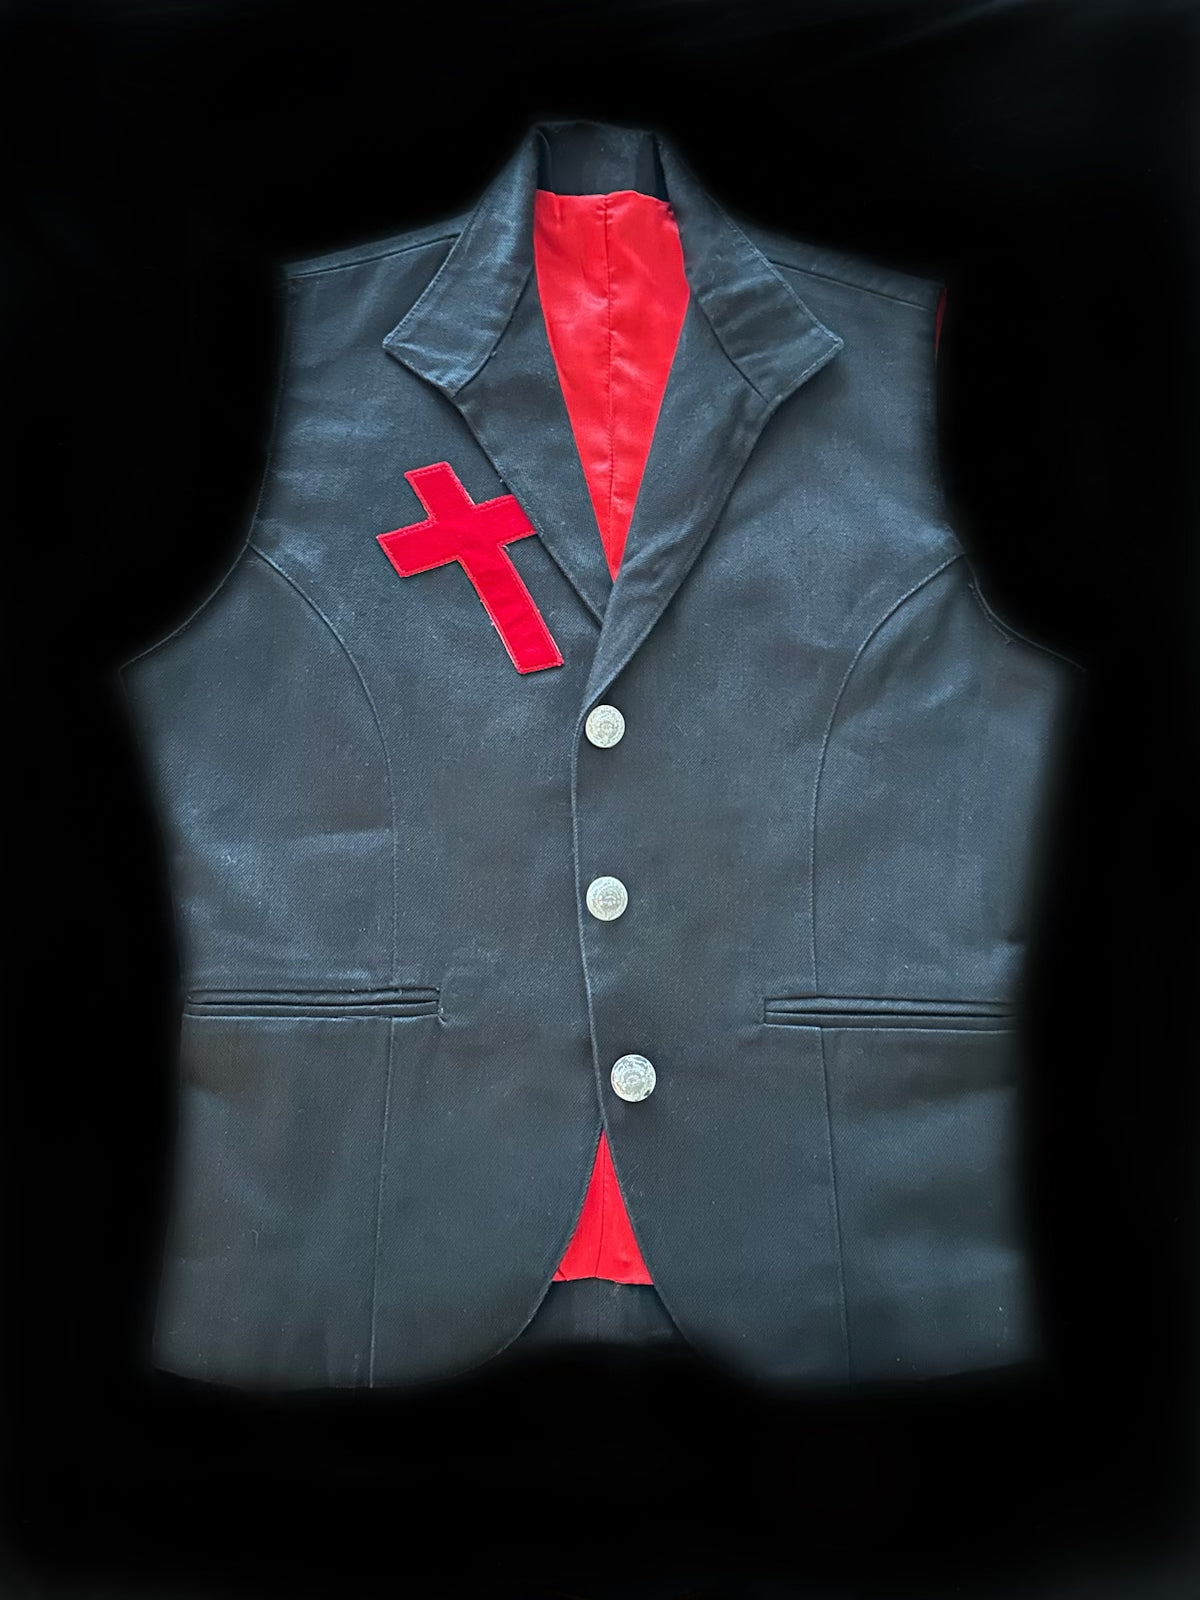 Custom One-Of-A-Kind Vest Featured In Scarlet Cross Music Video and Cover Of Kerrang! Magazine